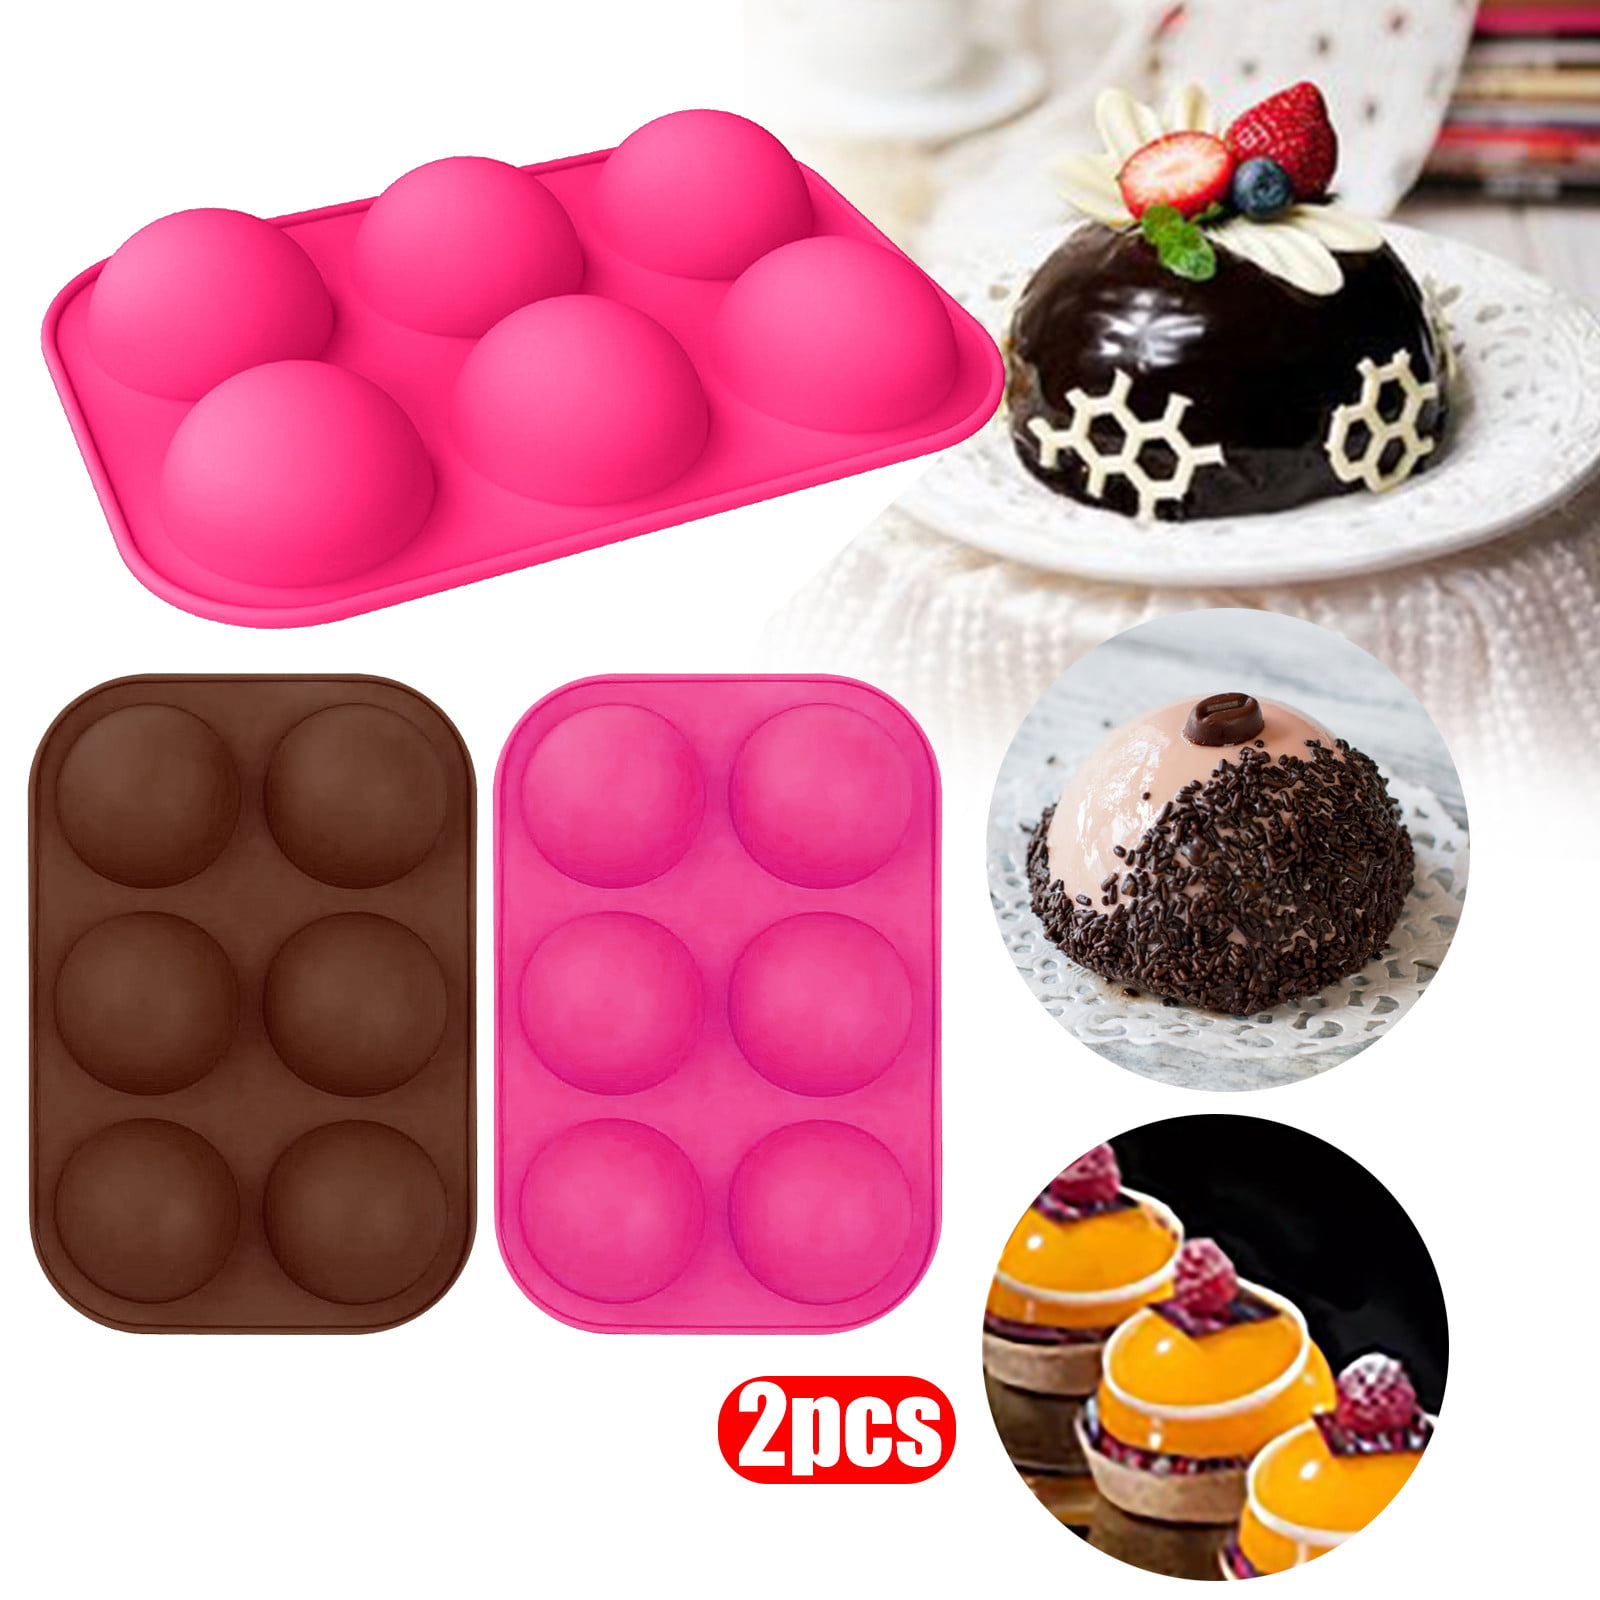 Silicone Half Ball Sphere Chocolate Cake Soap Muffin Pastry Jelly Mold Tray 